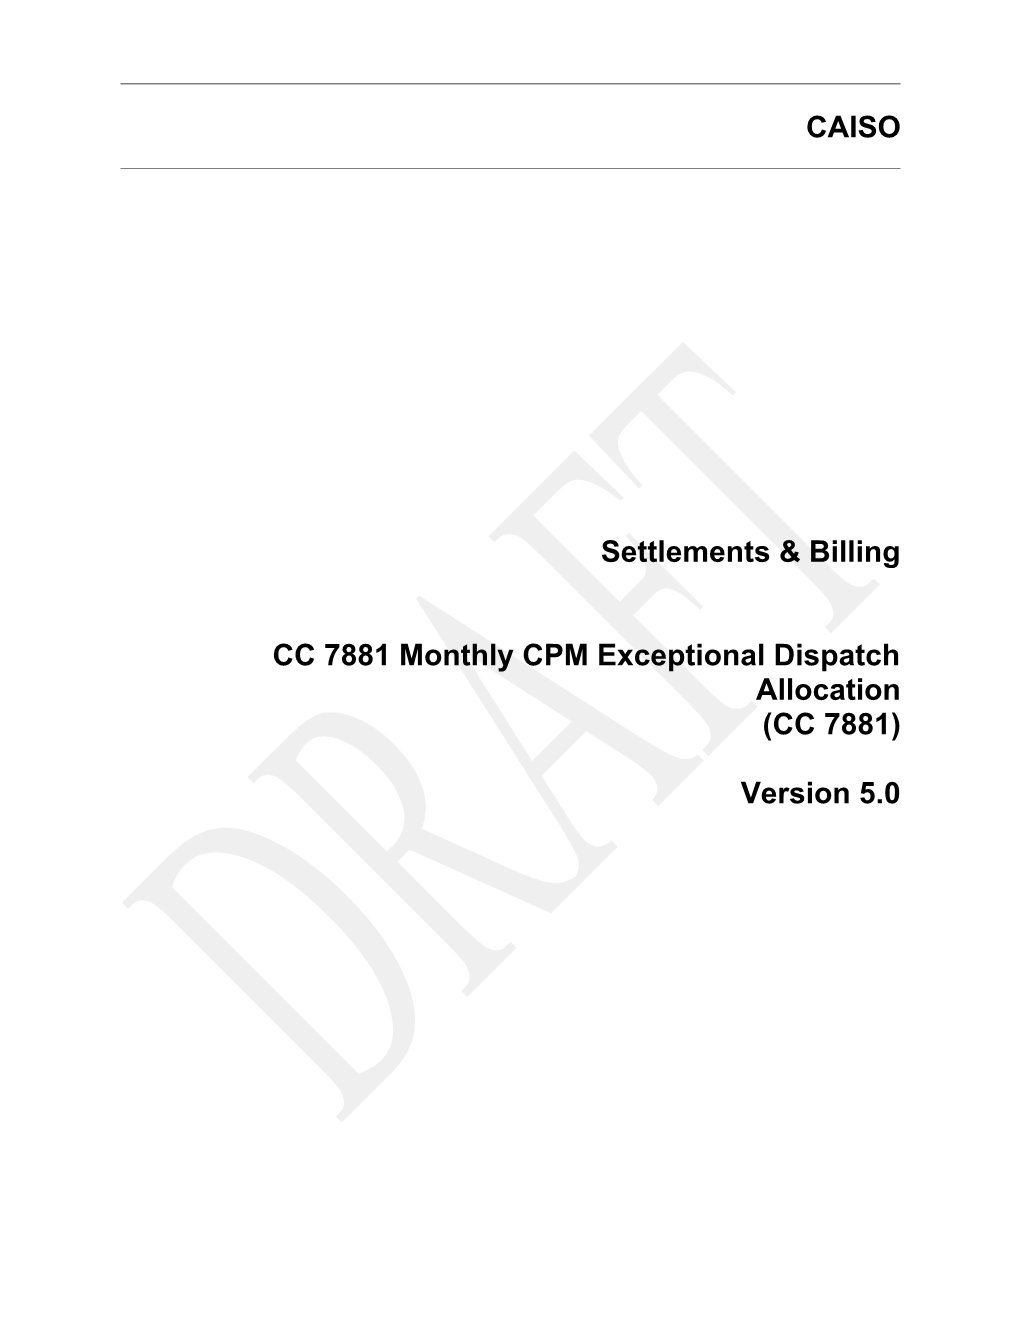 CC 7881 Monthly CPM Exceptional Dispatch Allocation